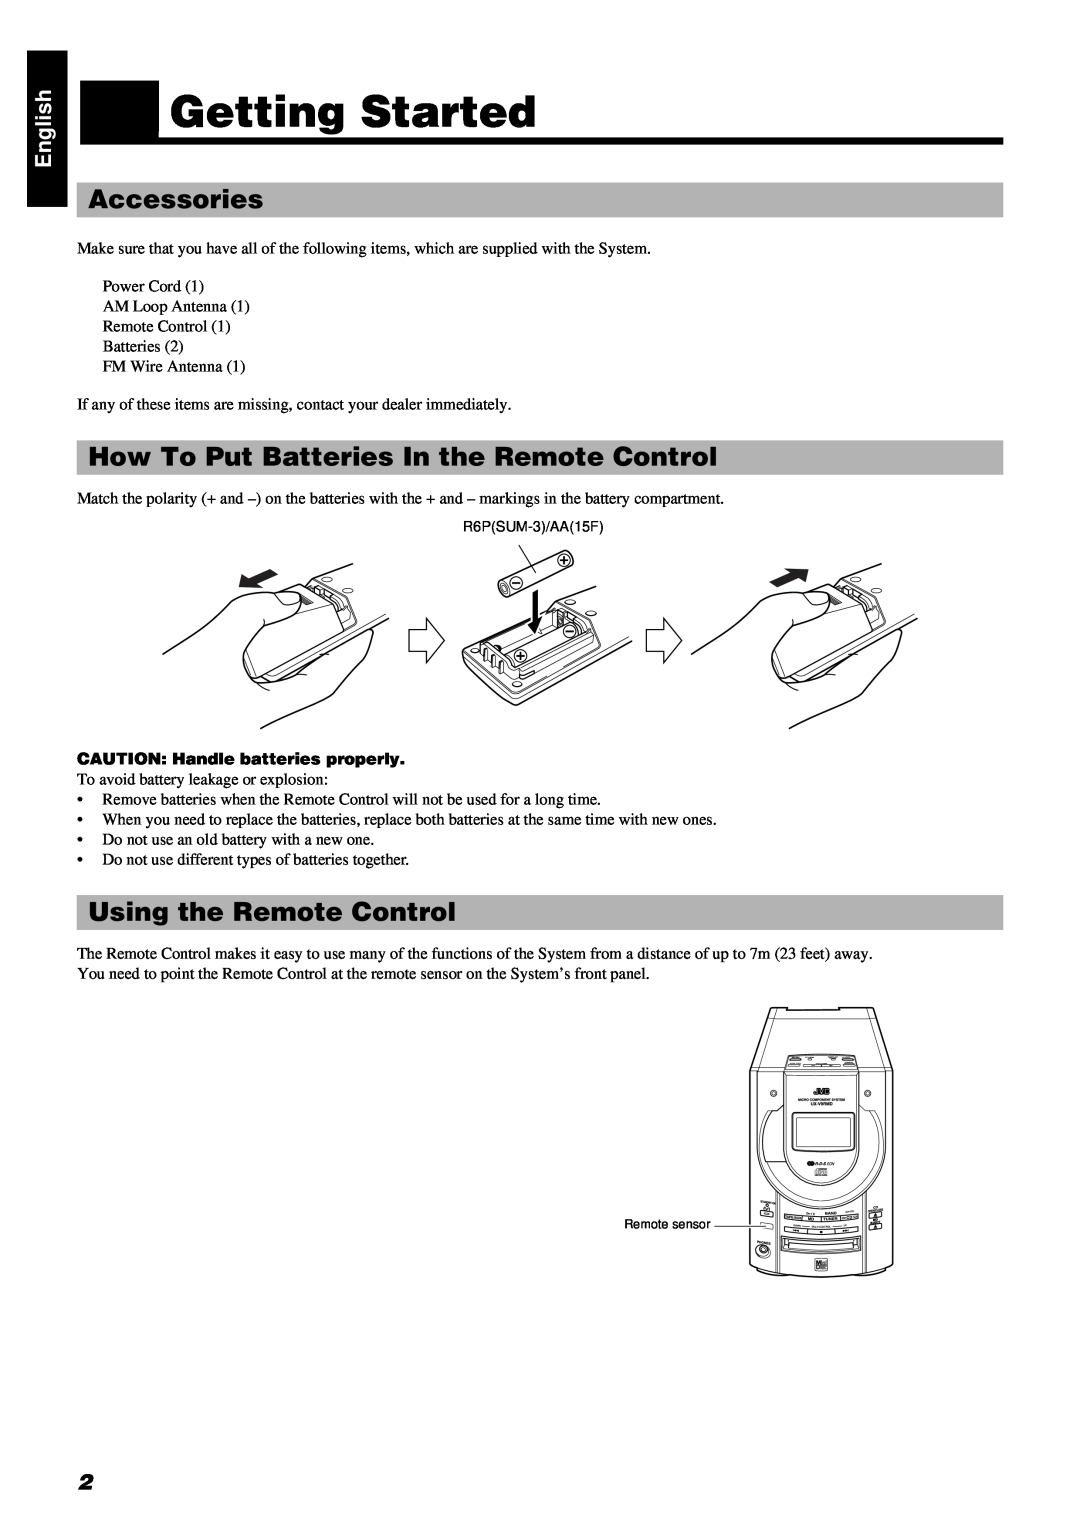 JVC RM-RXUV9RMD manual Getting Started, Accessories, How To Put Batteries In the Remote Control, Using the Remote Control 